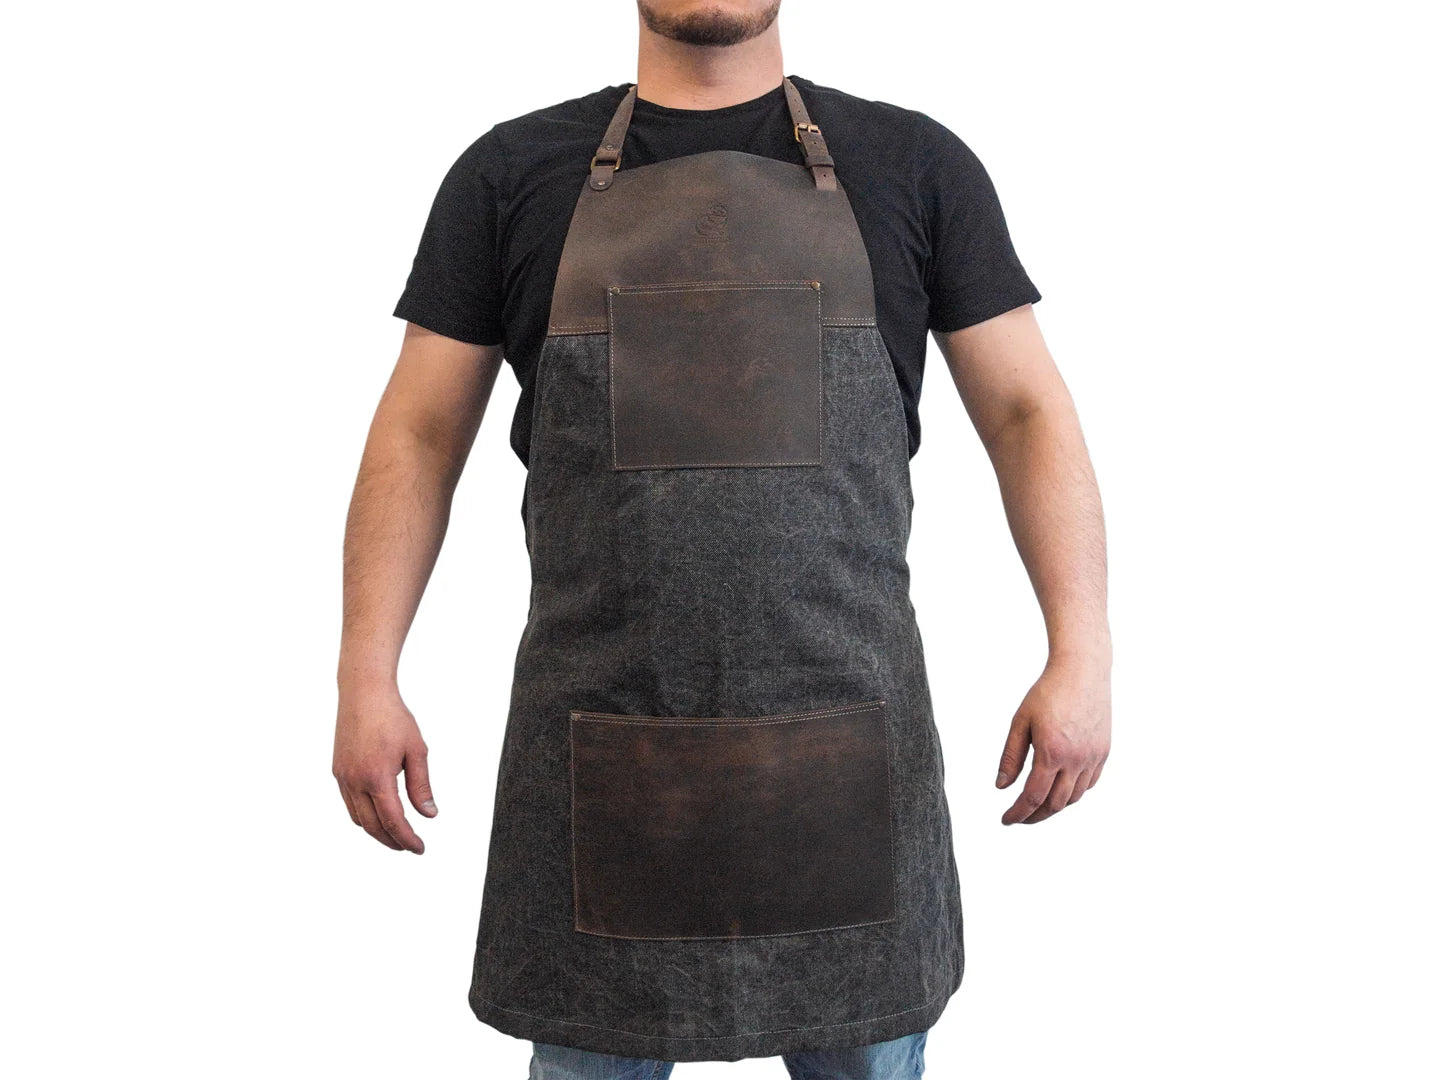 AP4 – Adjustable Canvas and Leather Work Apron